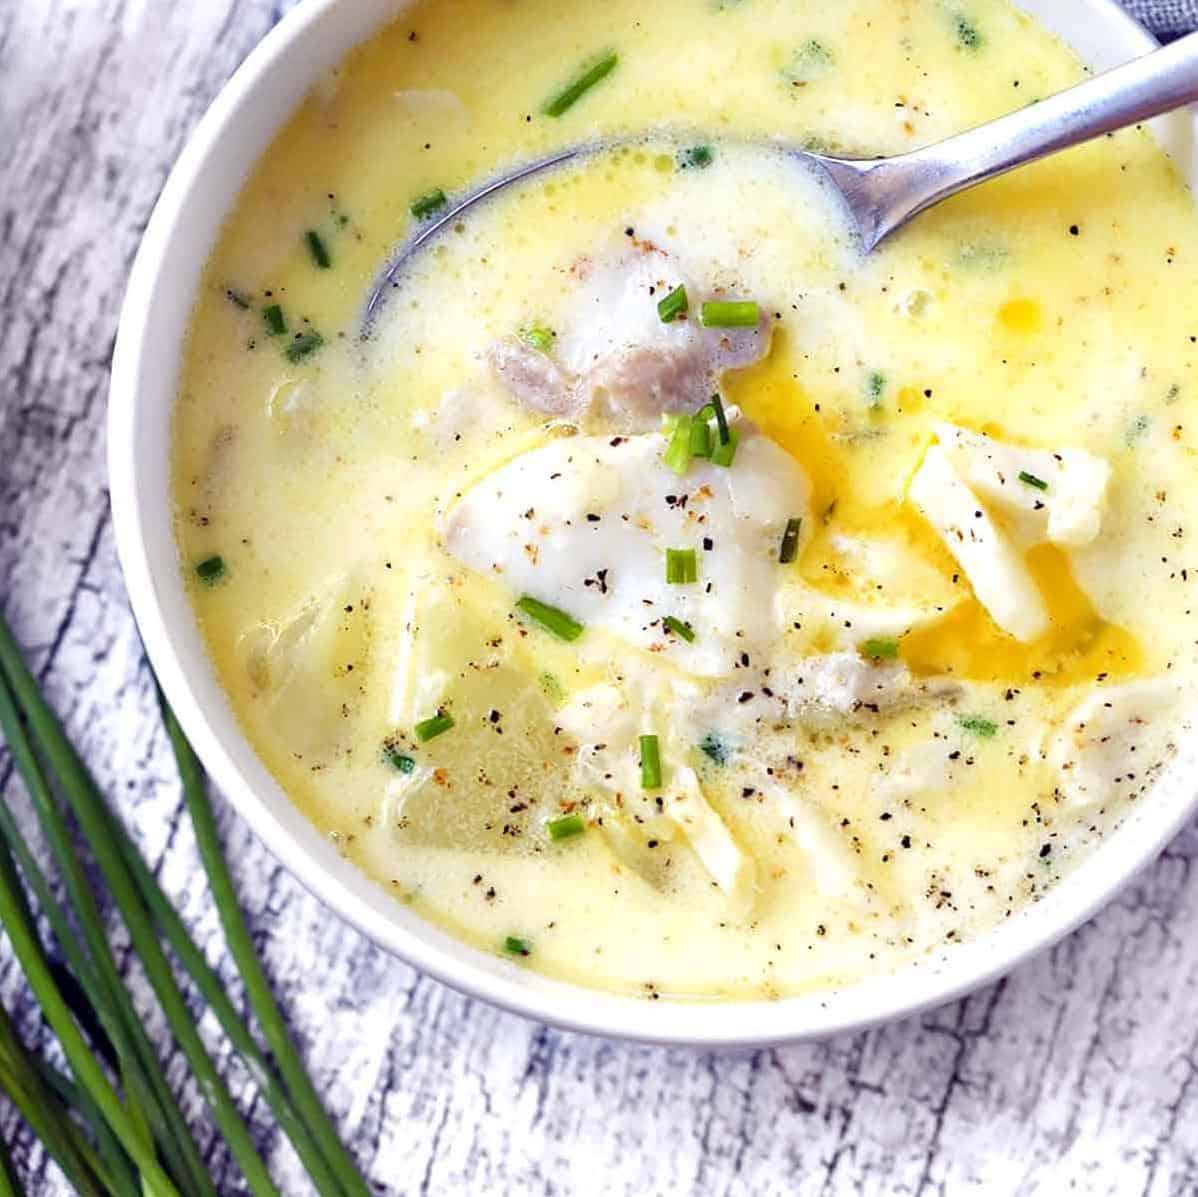  A tempting bowl of creamy fish chowder just waiting to be devoured